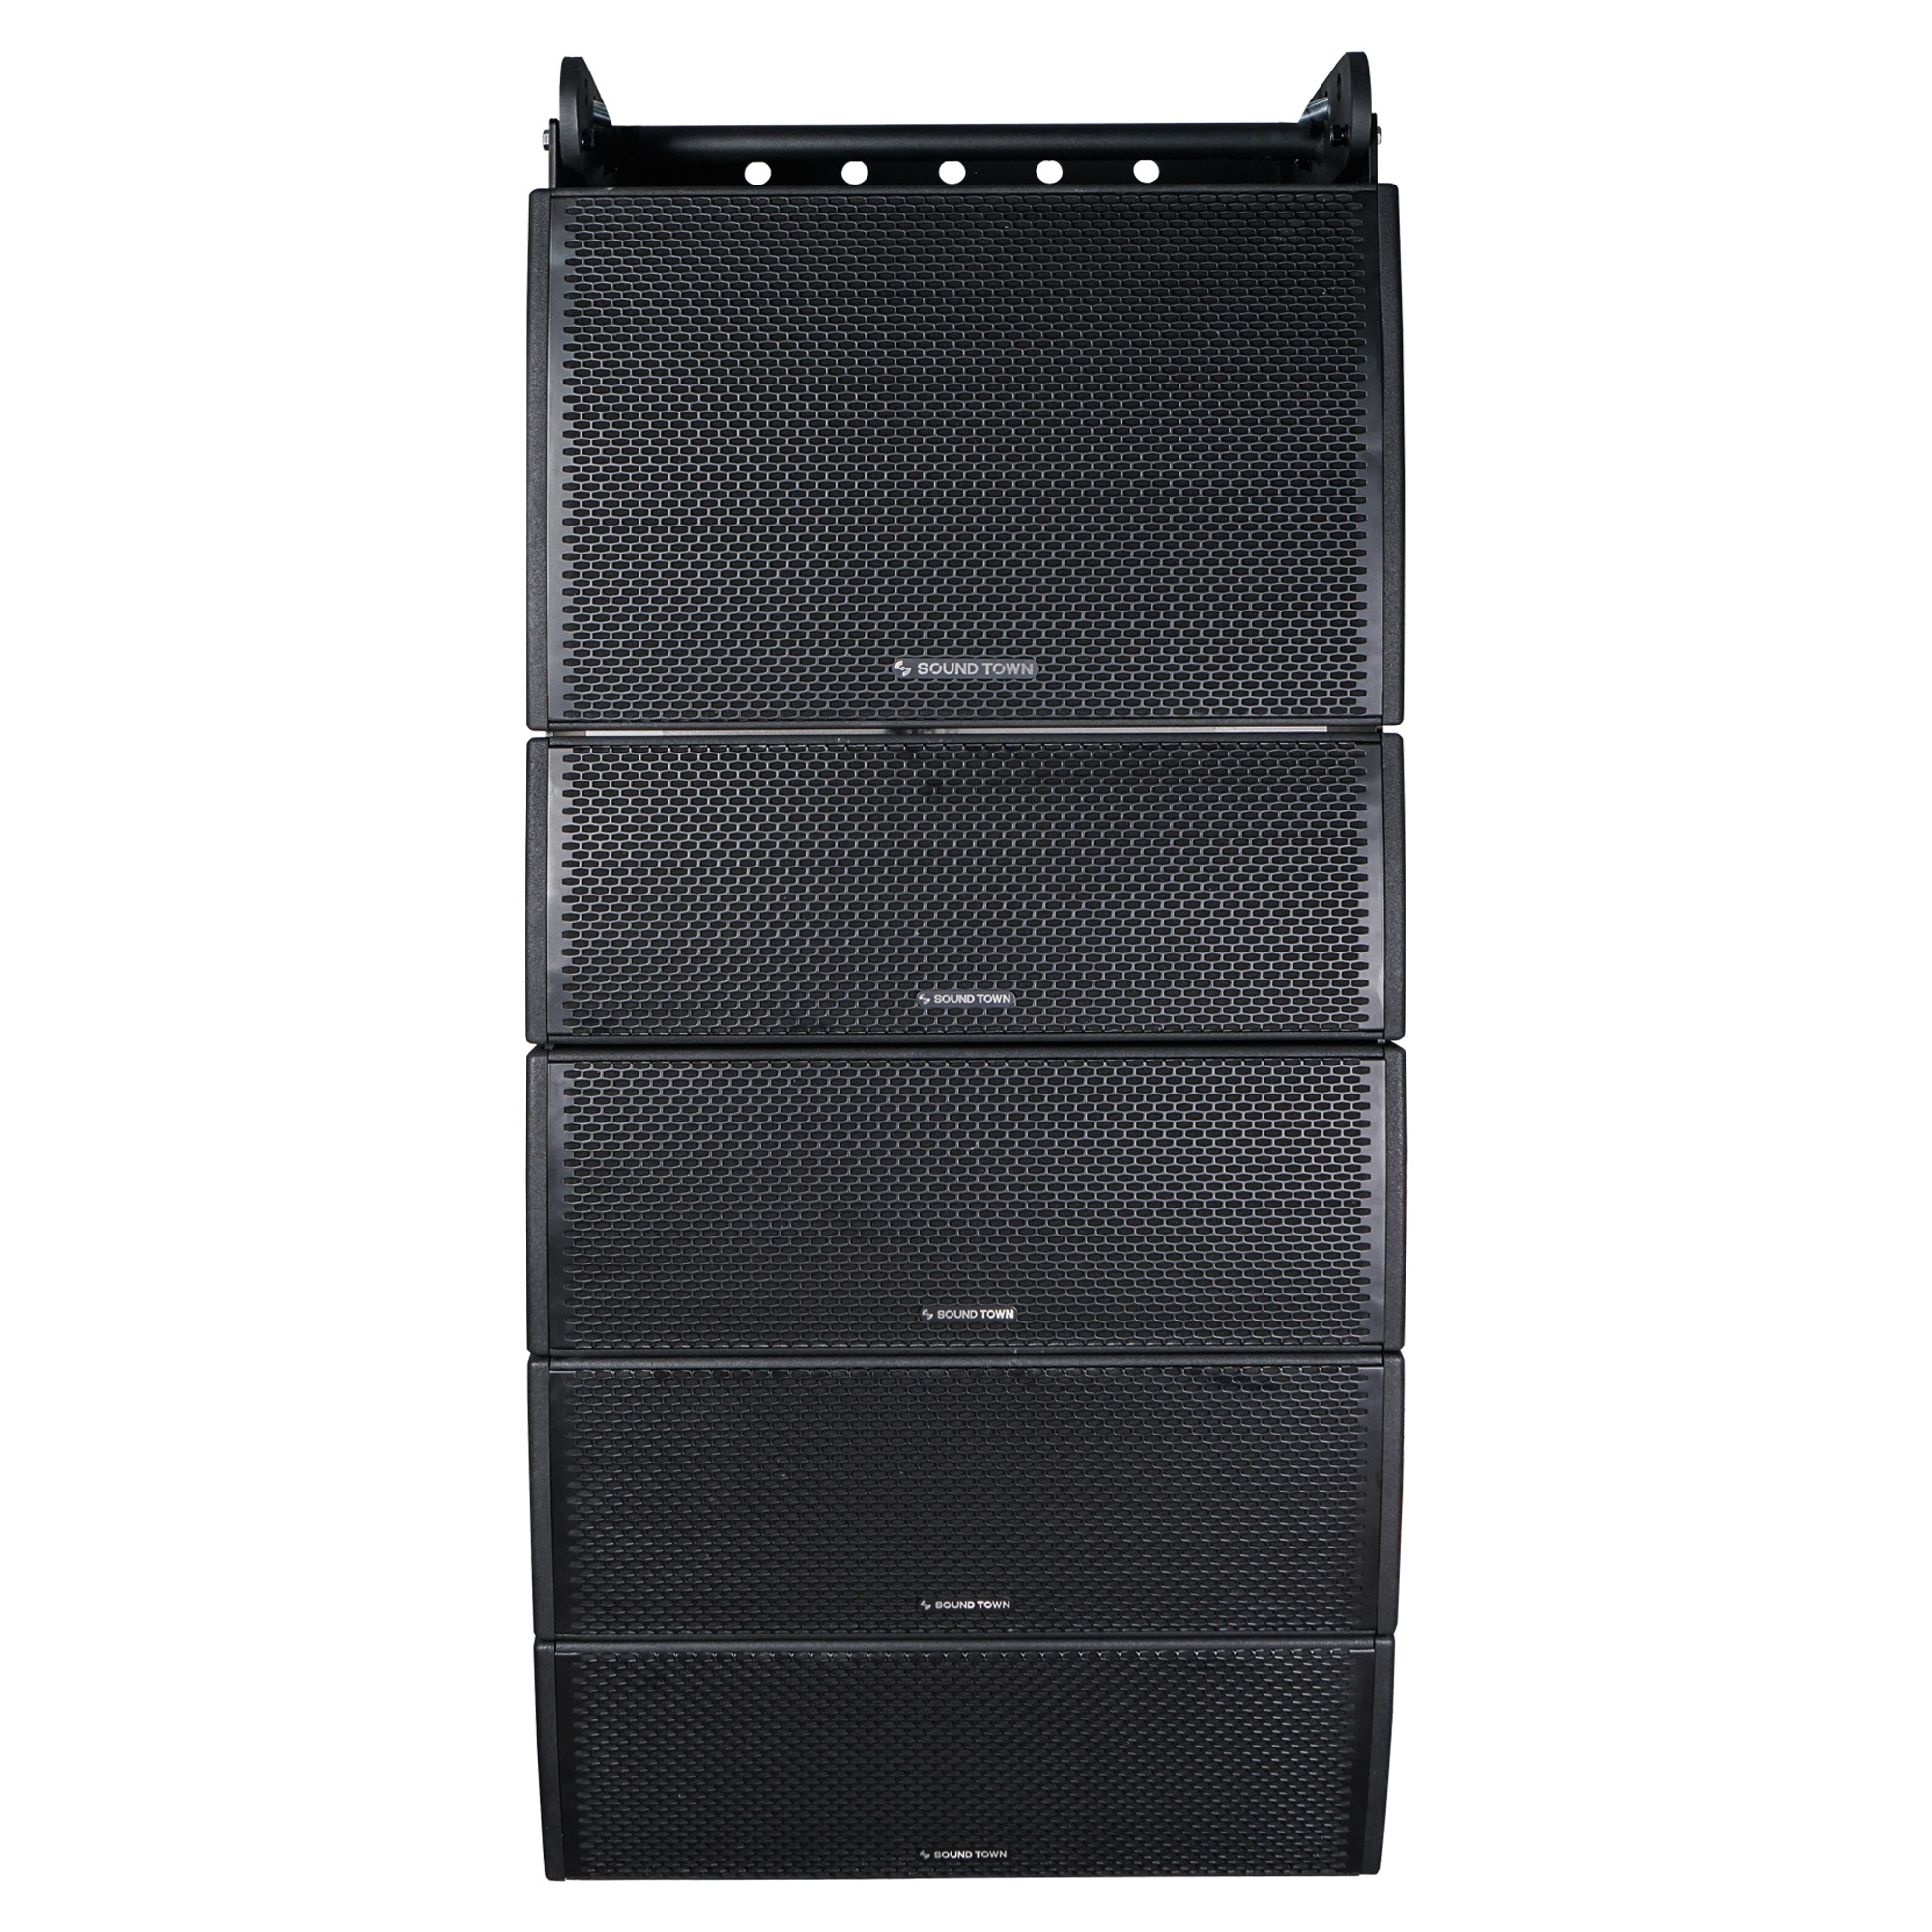 Sound Town All-Weather Line Array System with 15-inch Water-Resistant Line Array Subwoofer, Four Compact Dual 8-inch Line Array PA Speakers, Full Range/Bi-amp Switchable, Black (ZETHUS-IP115S208X4) - image 4 of 8